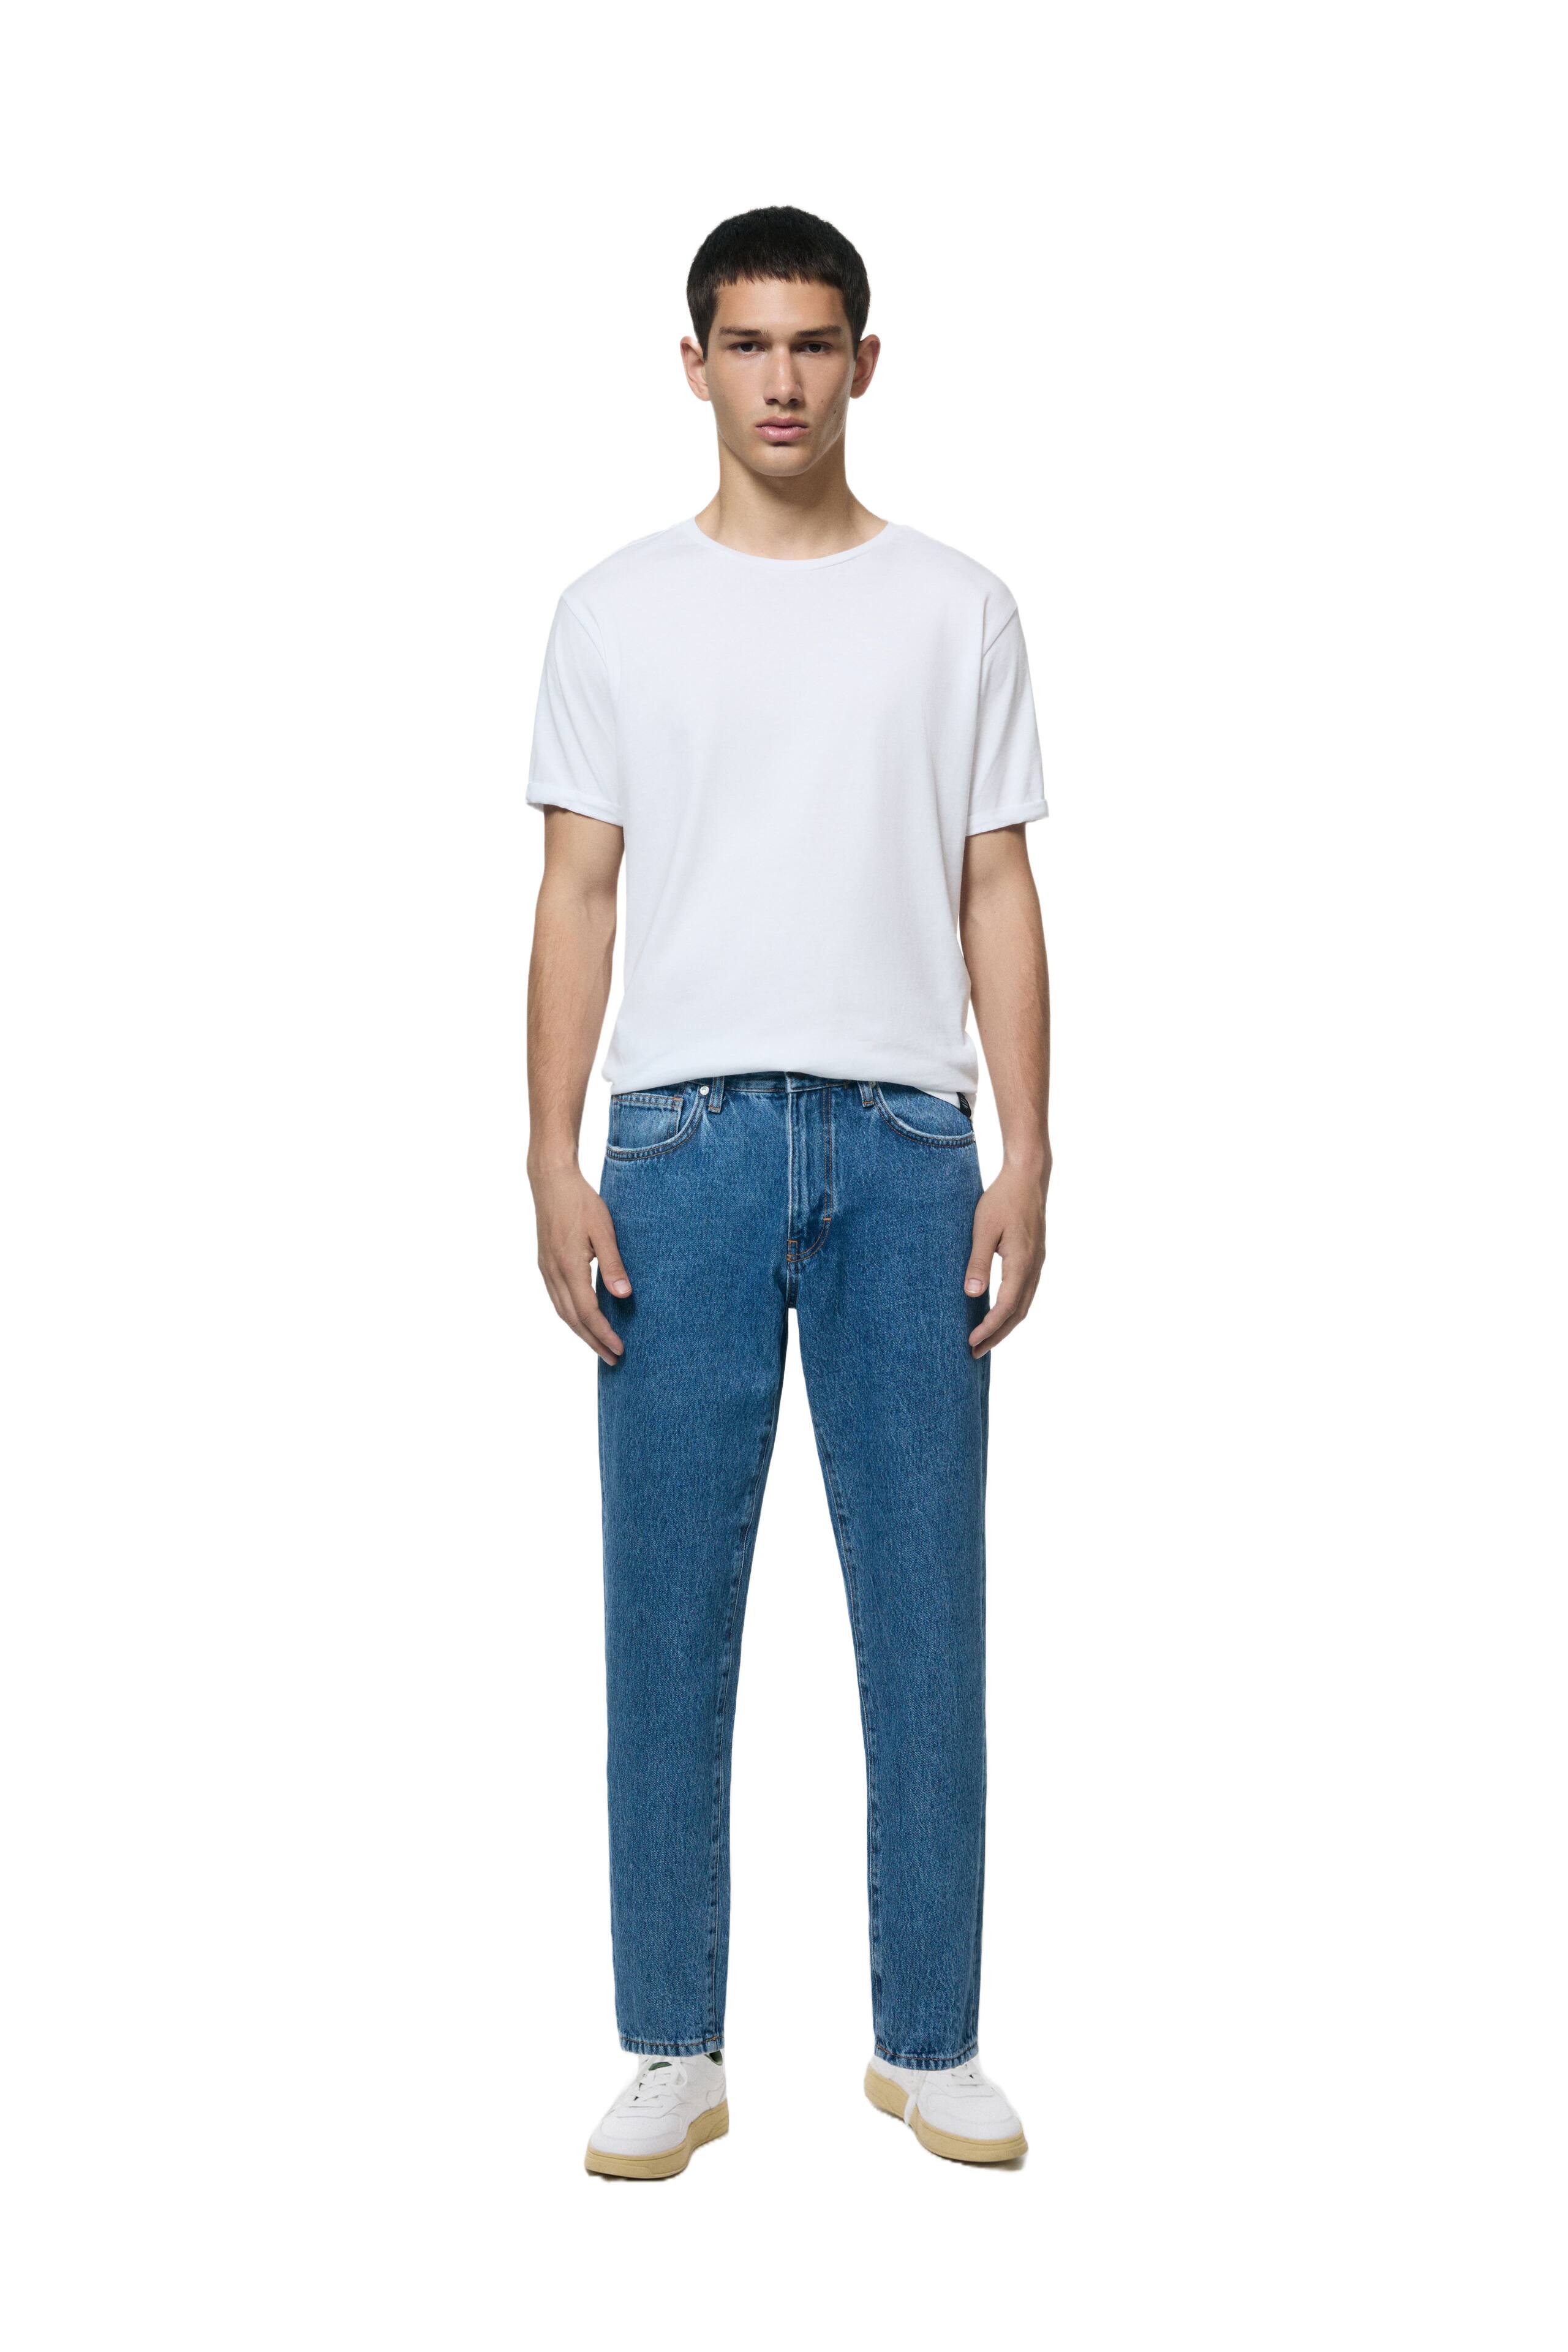 Men's Relaxed Fit Jeans, Relaxed Fit Jeans